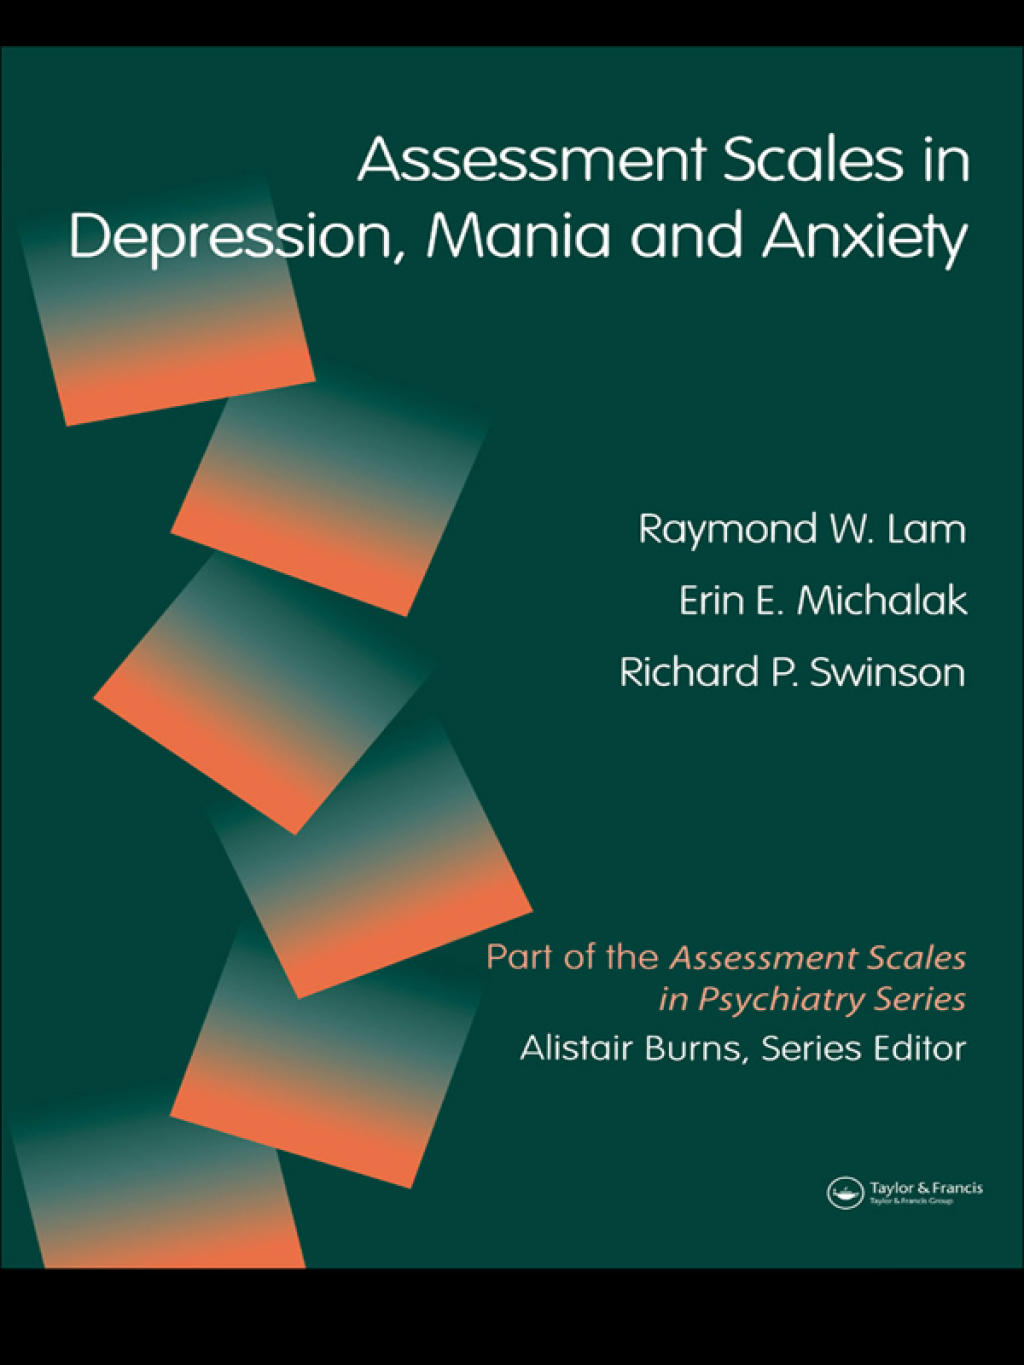 Assessment Scales in Depression and Anxiety - CORPORATE (eBook) - Raymond W. Lam; Erin E. Michalaak; Richard P. Swinson